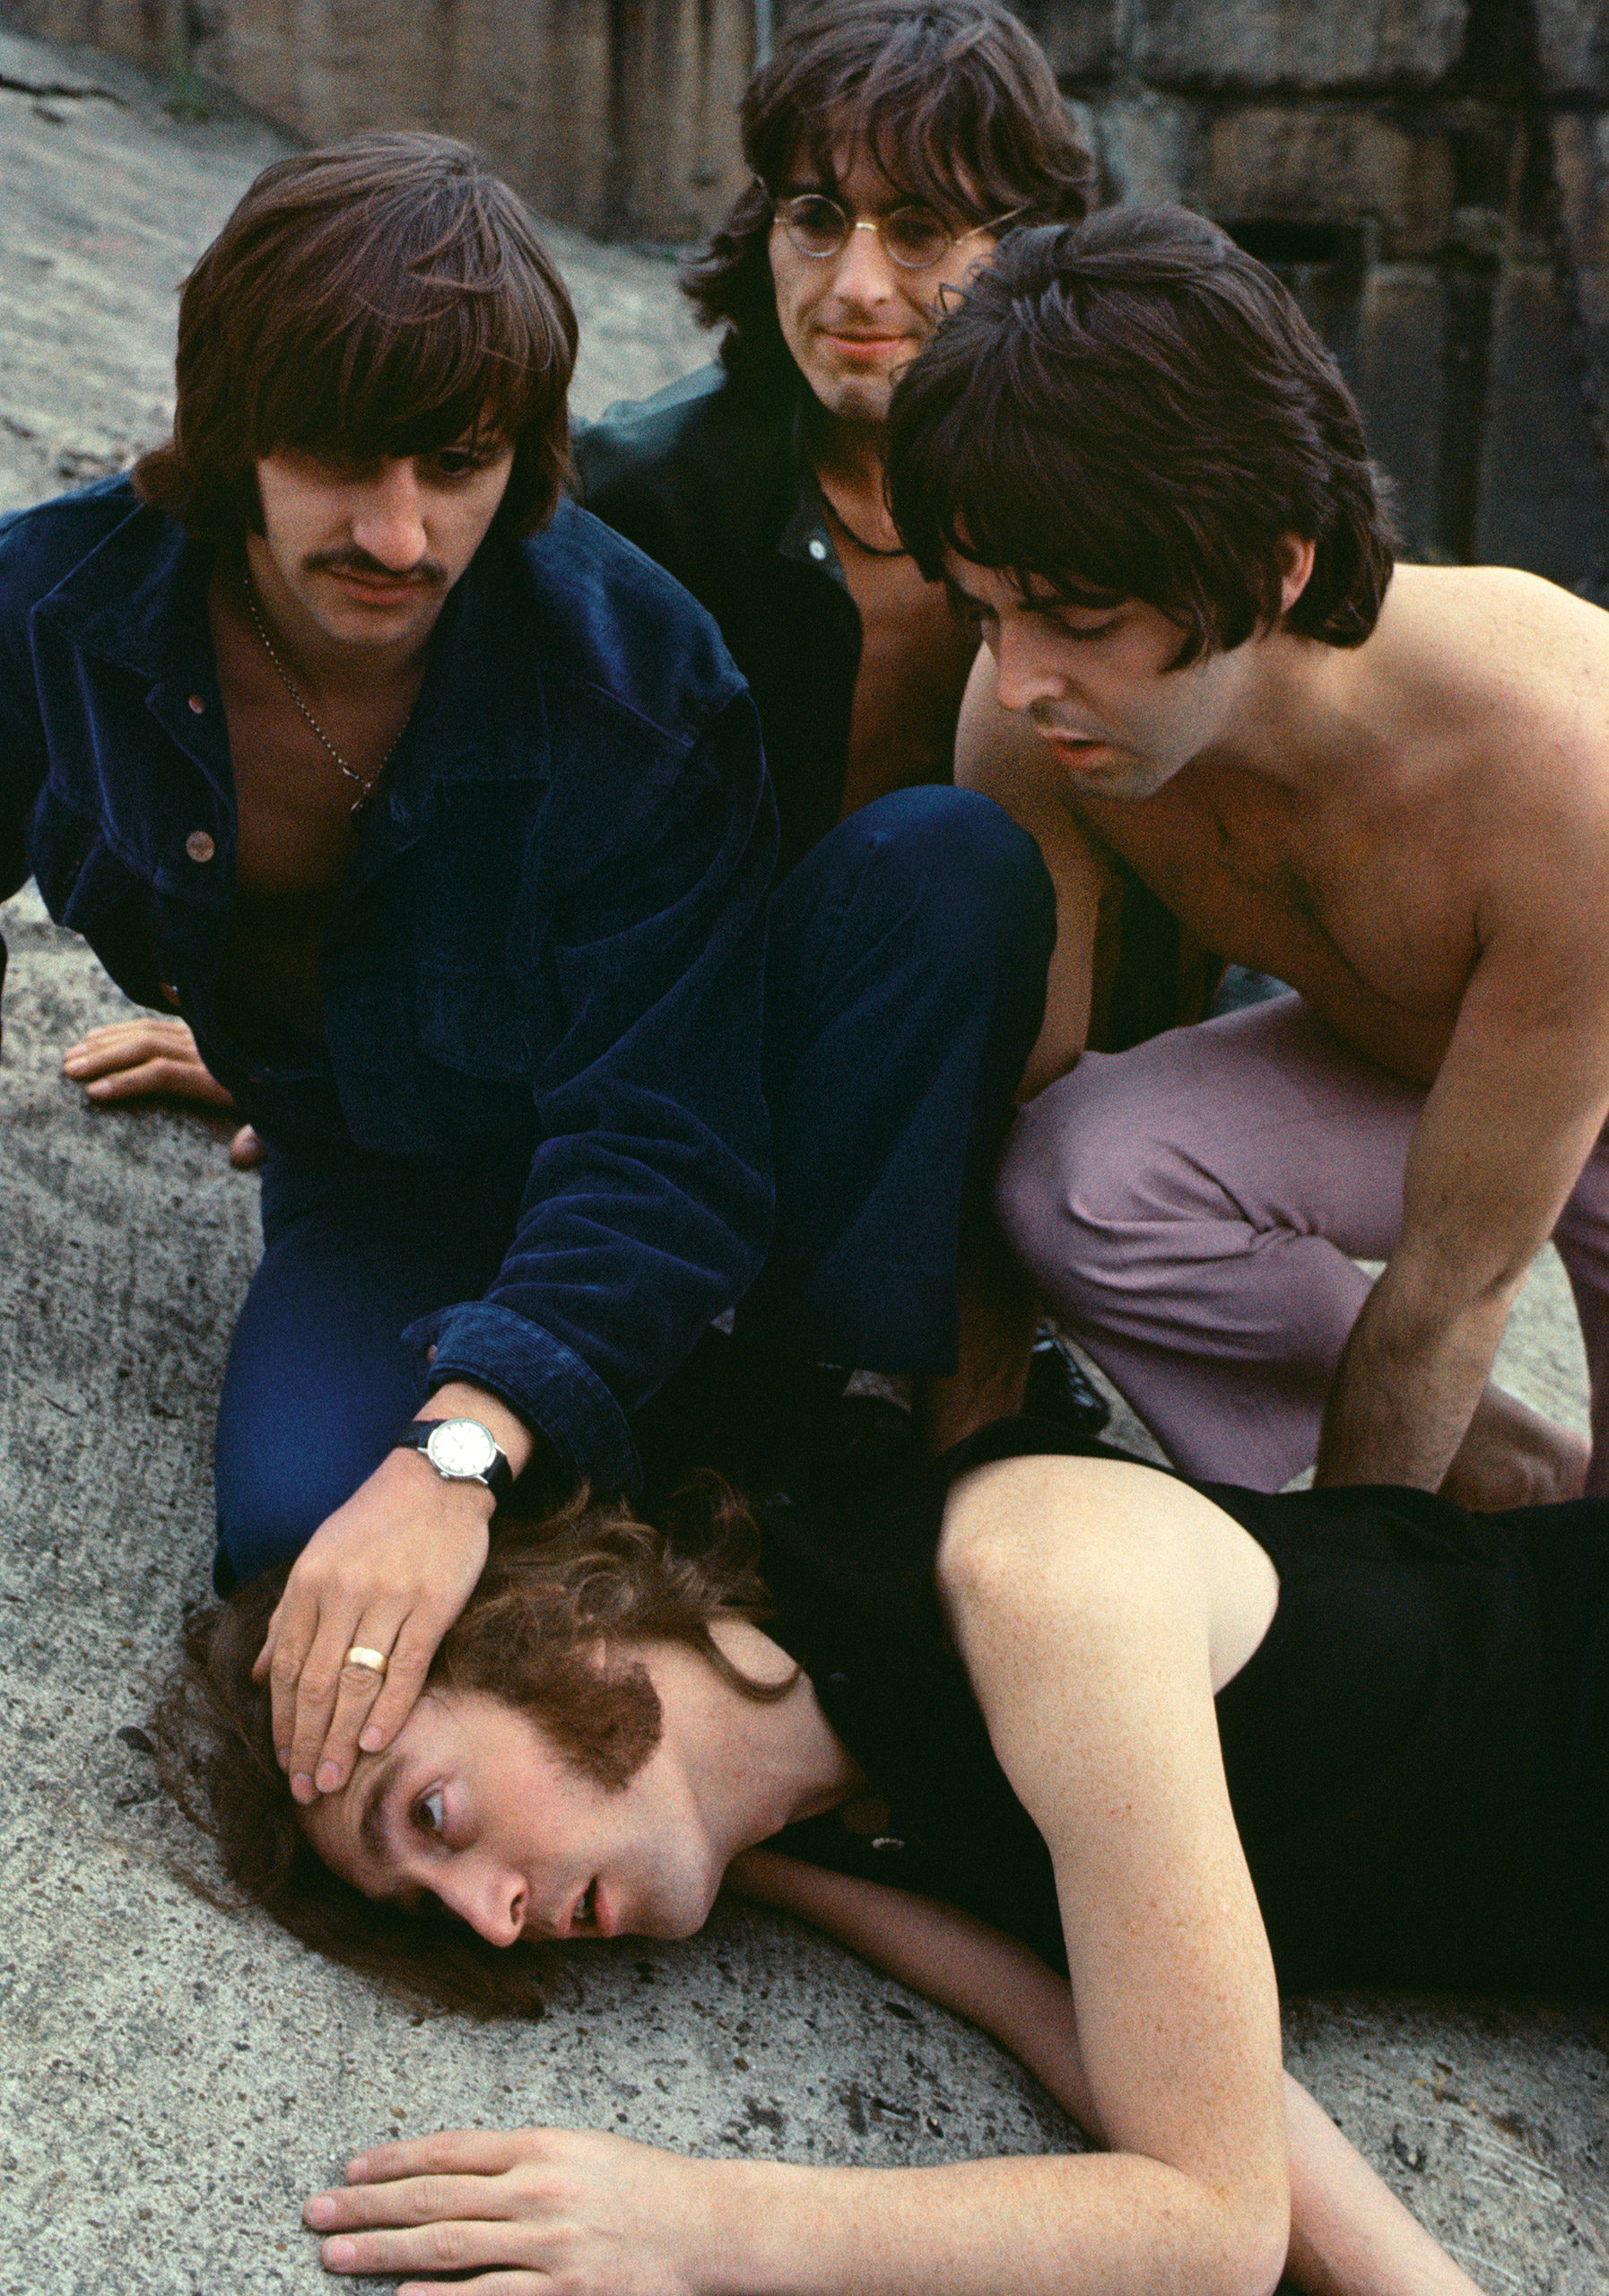 The Beatles from The Mad Day: Summer of ’68.